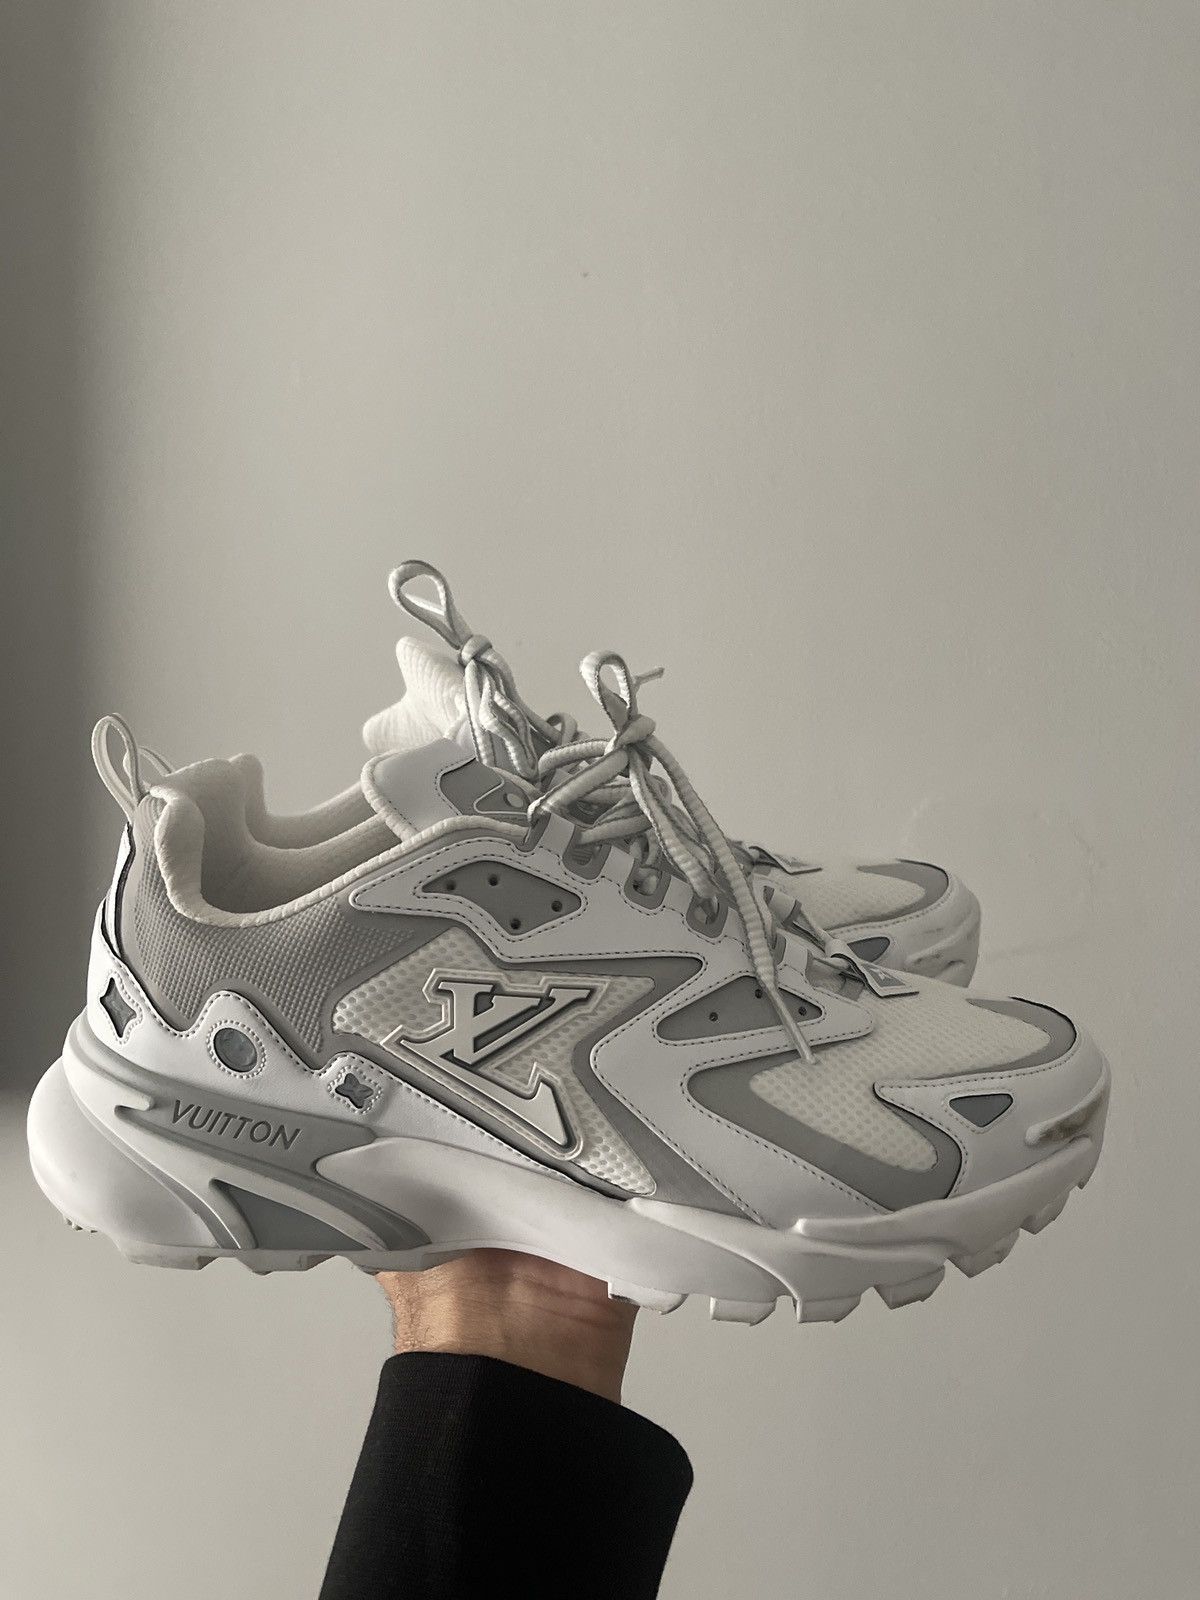 How to buy Virgil Abloh's SS22 Louis Vuitton Runner Tactic Trainer